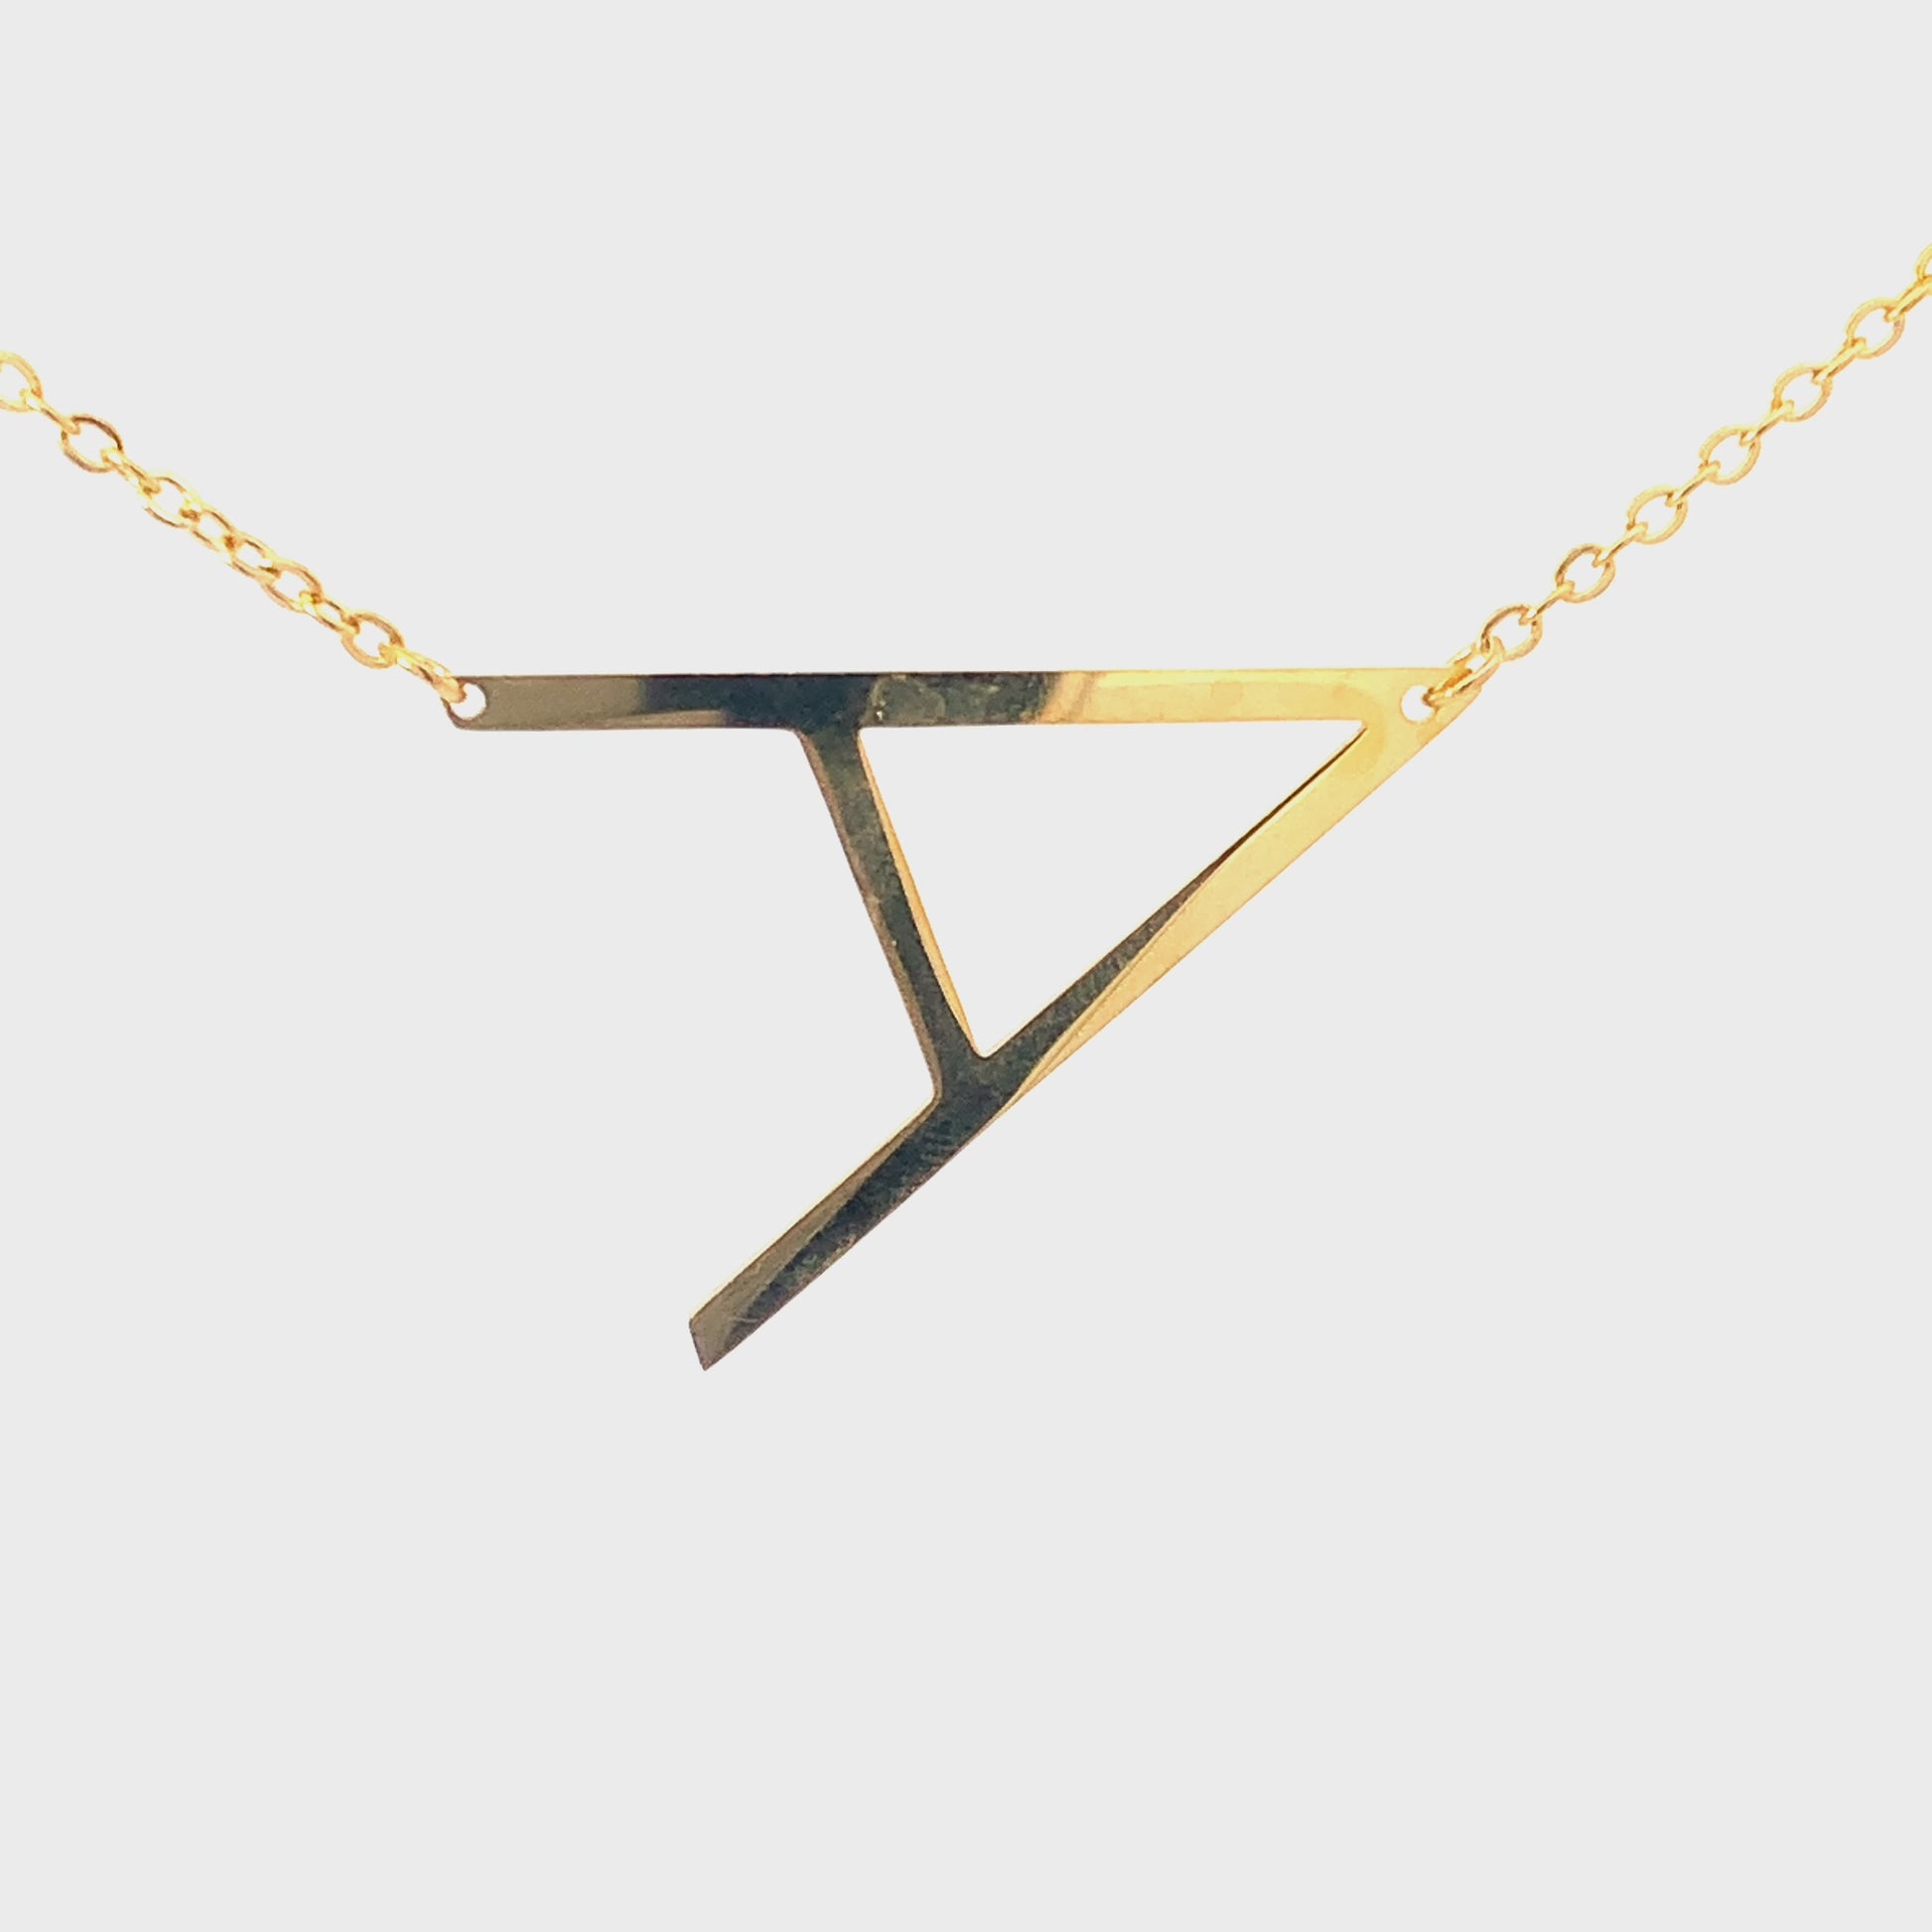 Oversized initial necklace in gold